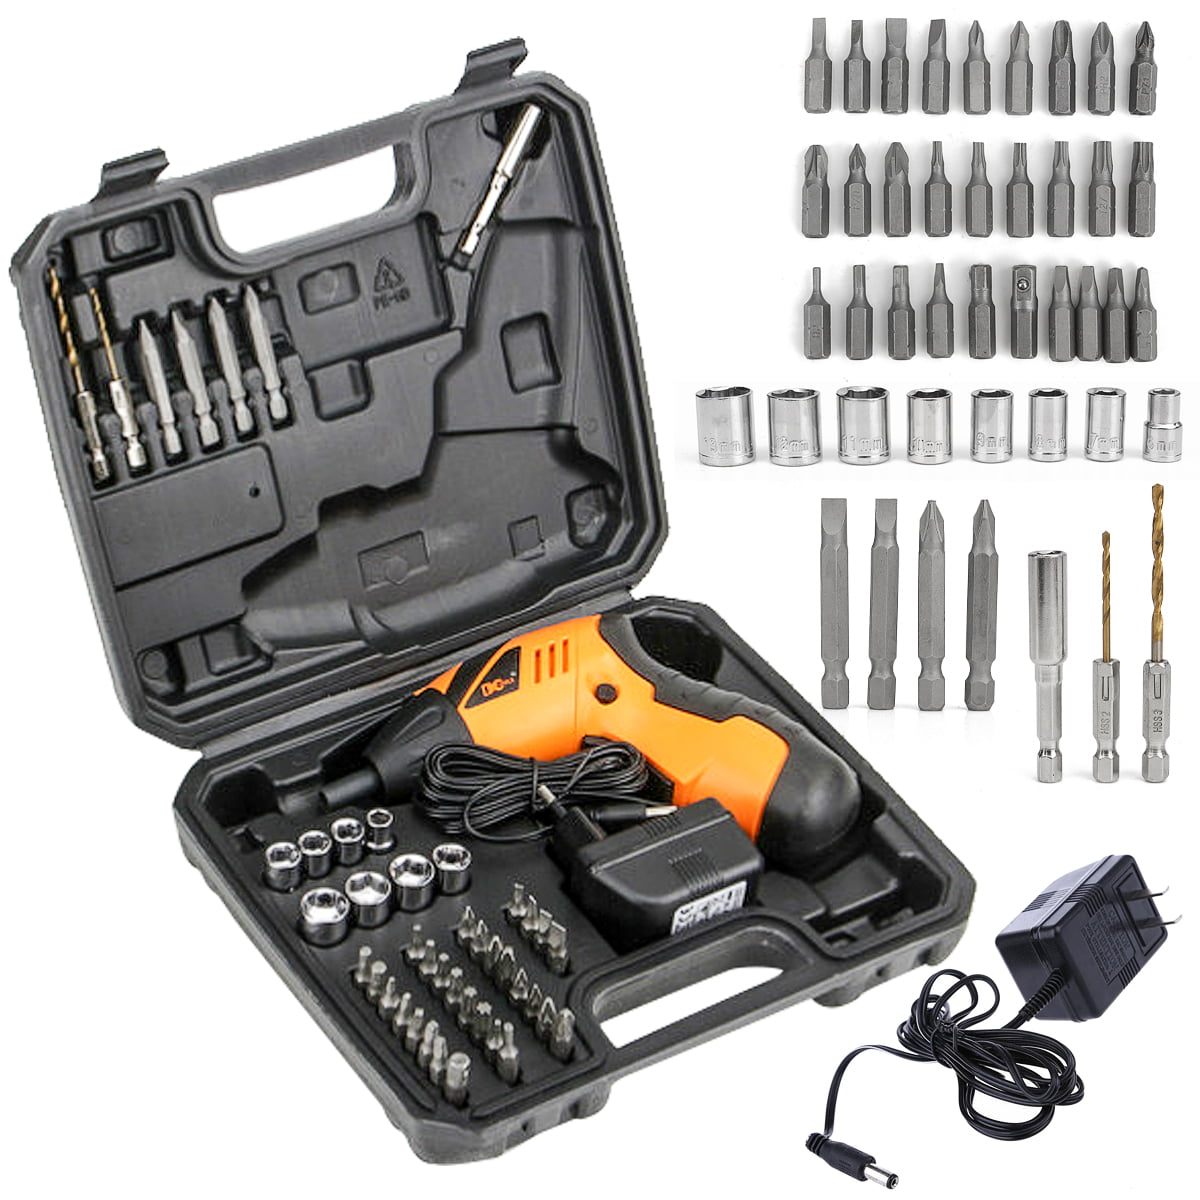 Charger & Accessories Kit Included Details about   Cordless Pivot Powered Screw Driver 